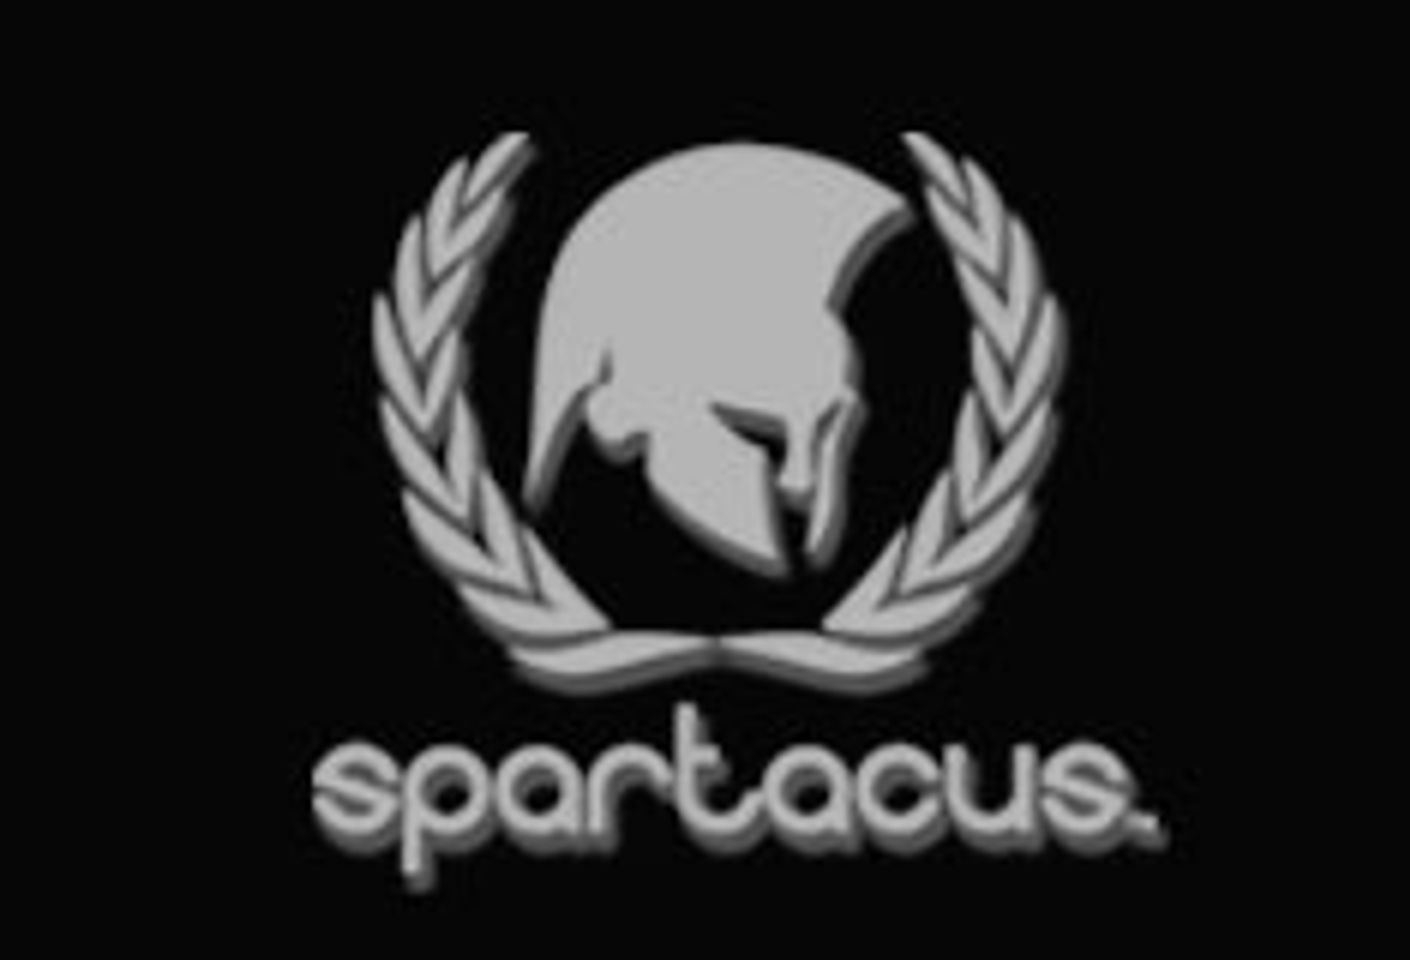 Spartacus Leathers Up For Fetish Company of the Year at 2015 StorErotica Awards